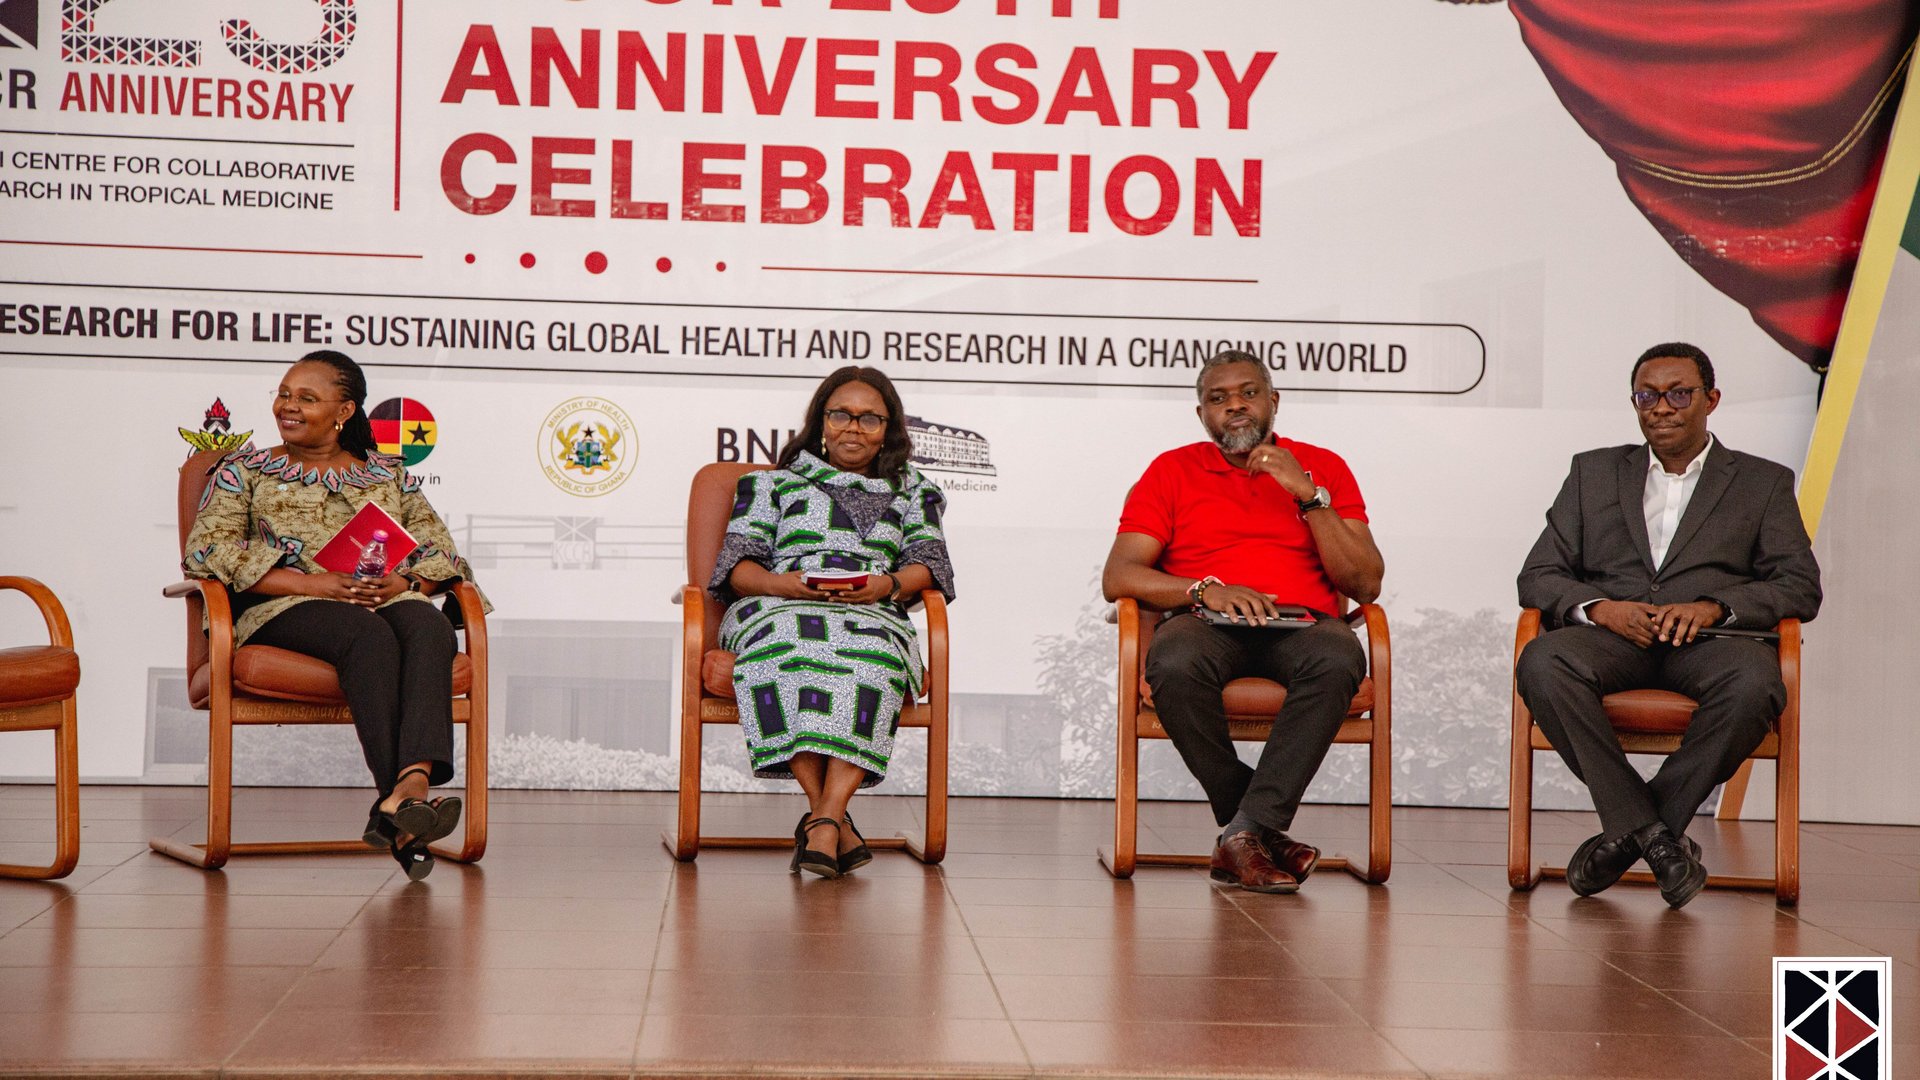 The photo shows two African female scientists and two African male scientists sitting in chairs on stage and discussing.